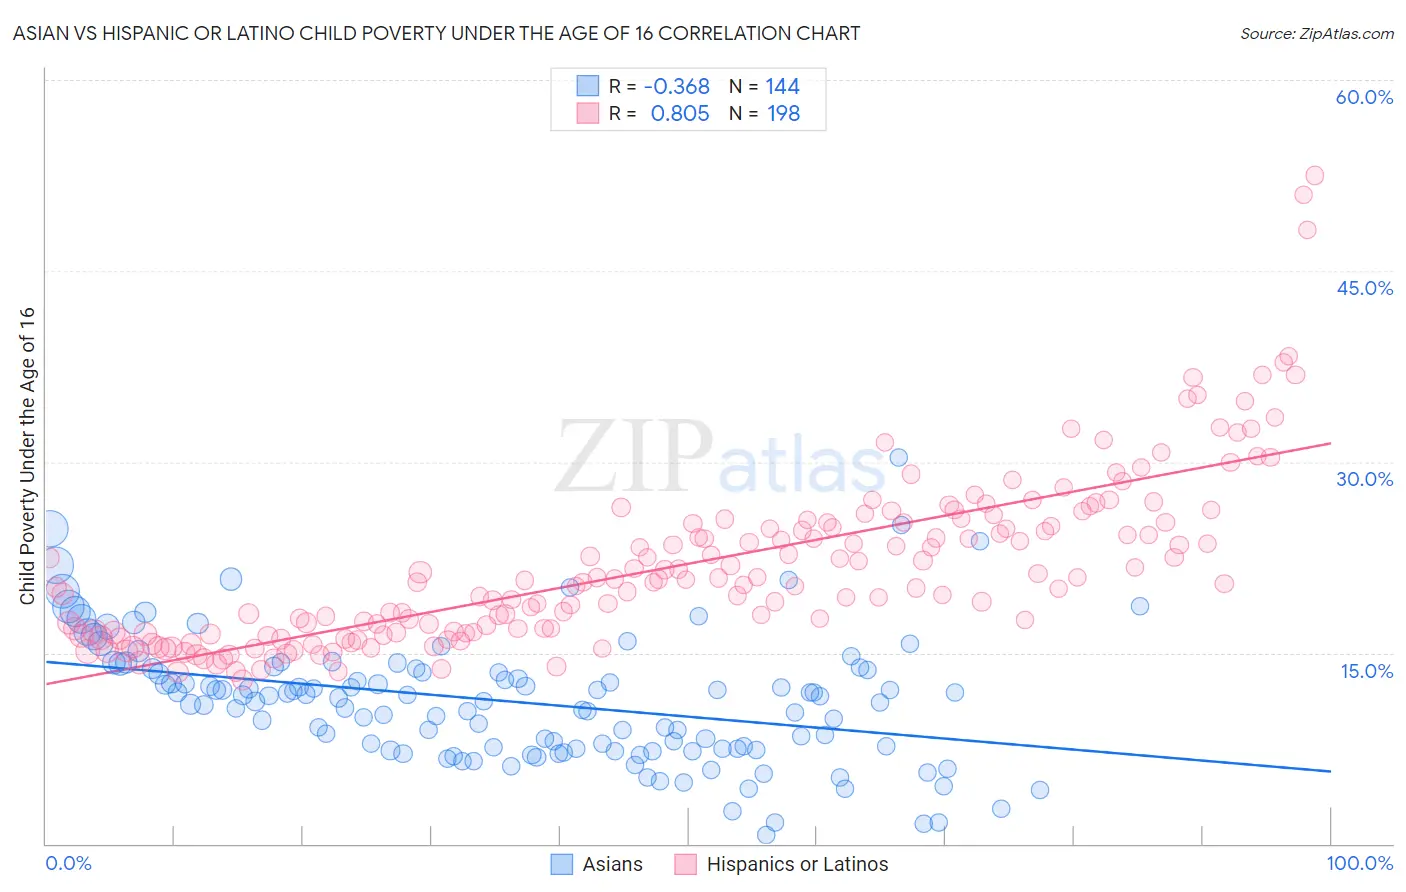 Asian vs Hispanic or Latino Child Poverty Under the Age of 16